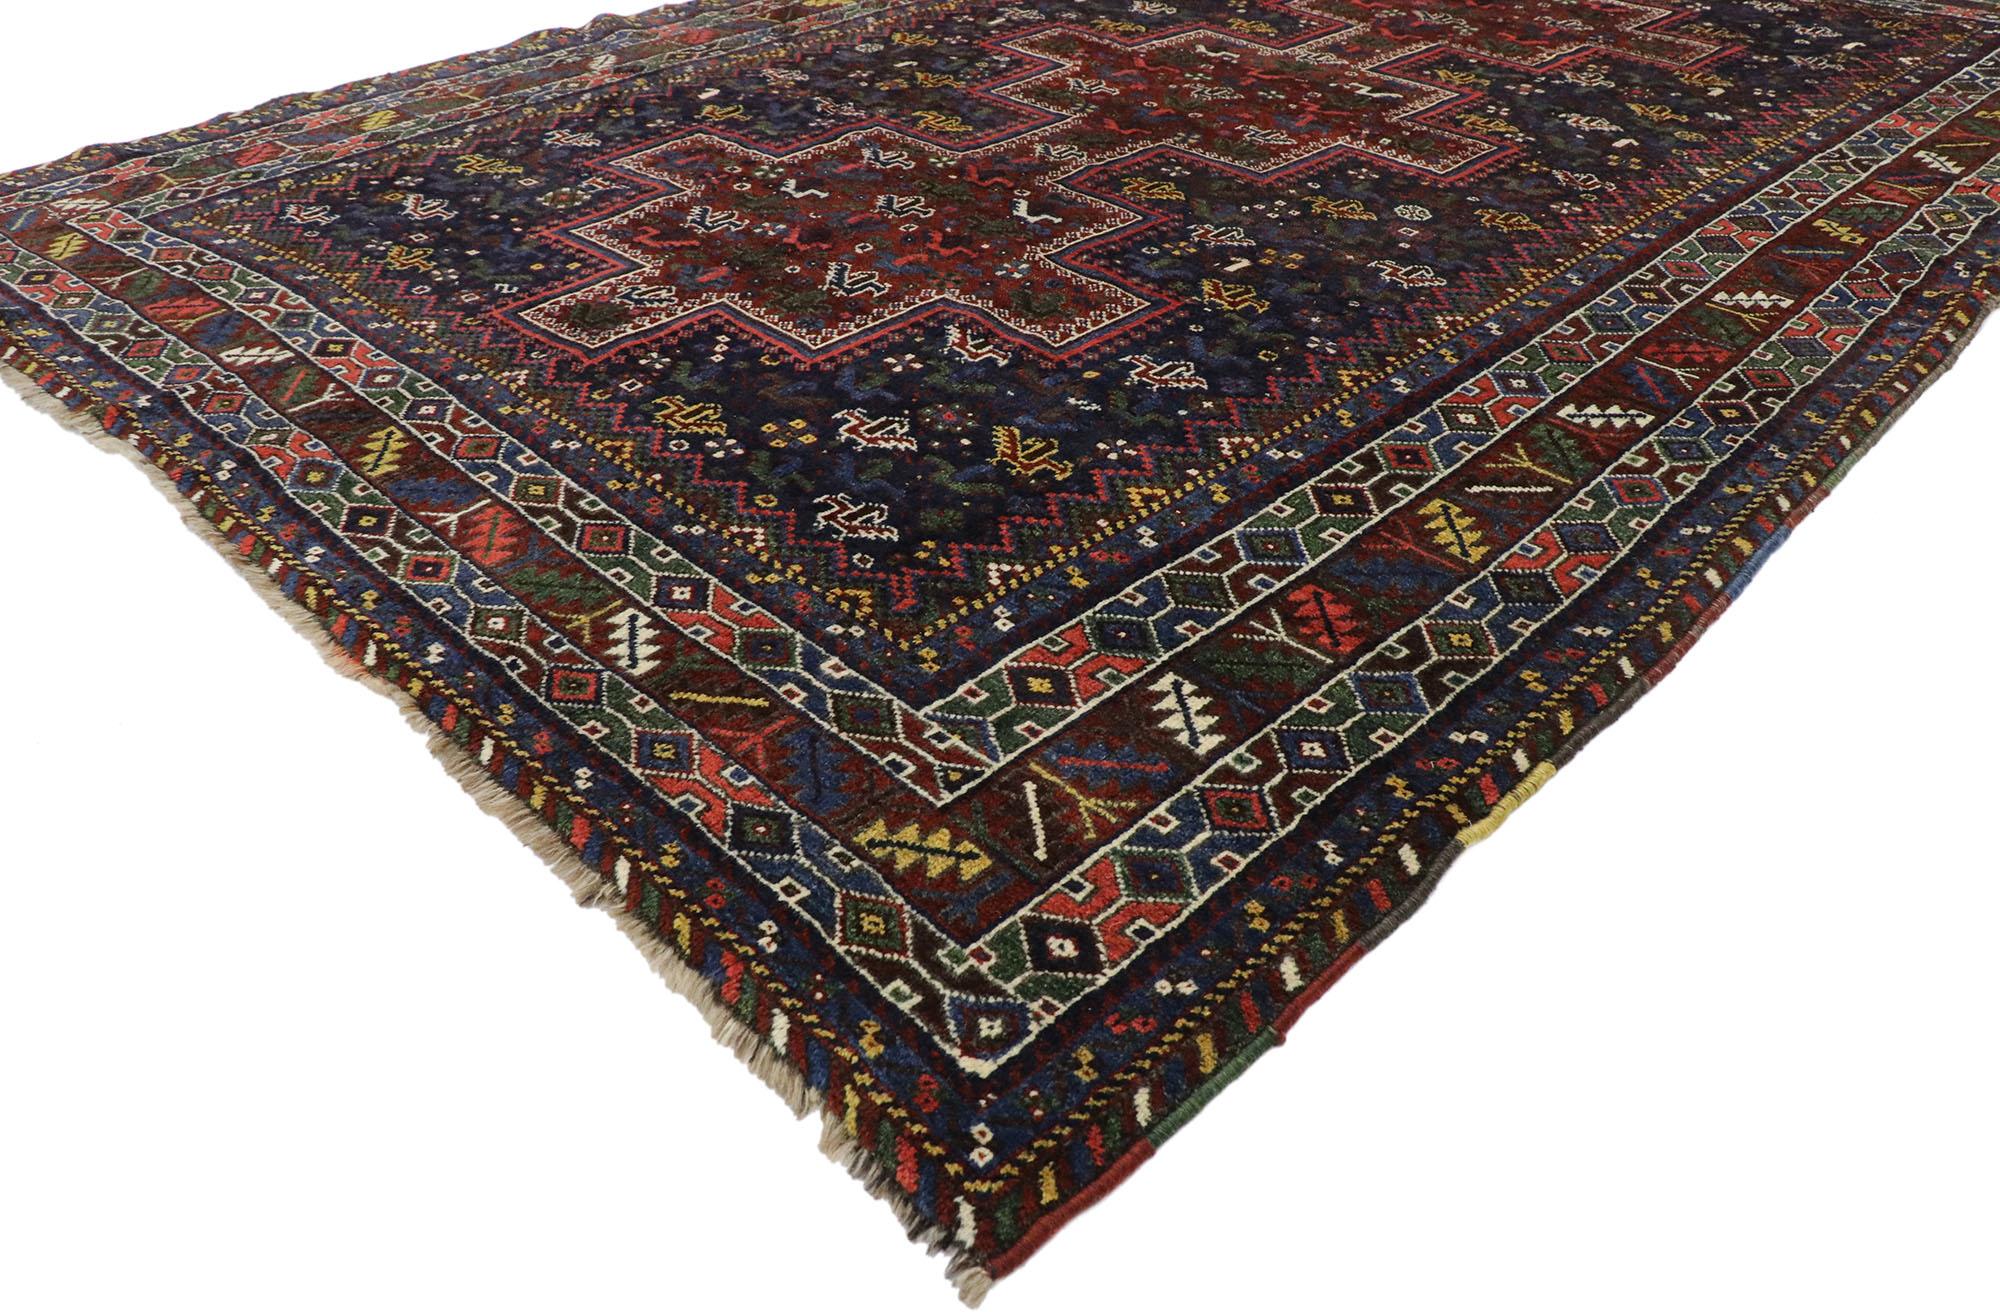 53396, antique Persian Shiraz rug with tribal style and nomadic charm. Embodying tribal style and understated elegance with rustic sensibility, this hand knotted wool antique Persian Shiraz rug is a captivating vision of woven beauty. A stepped pole